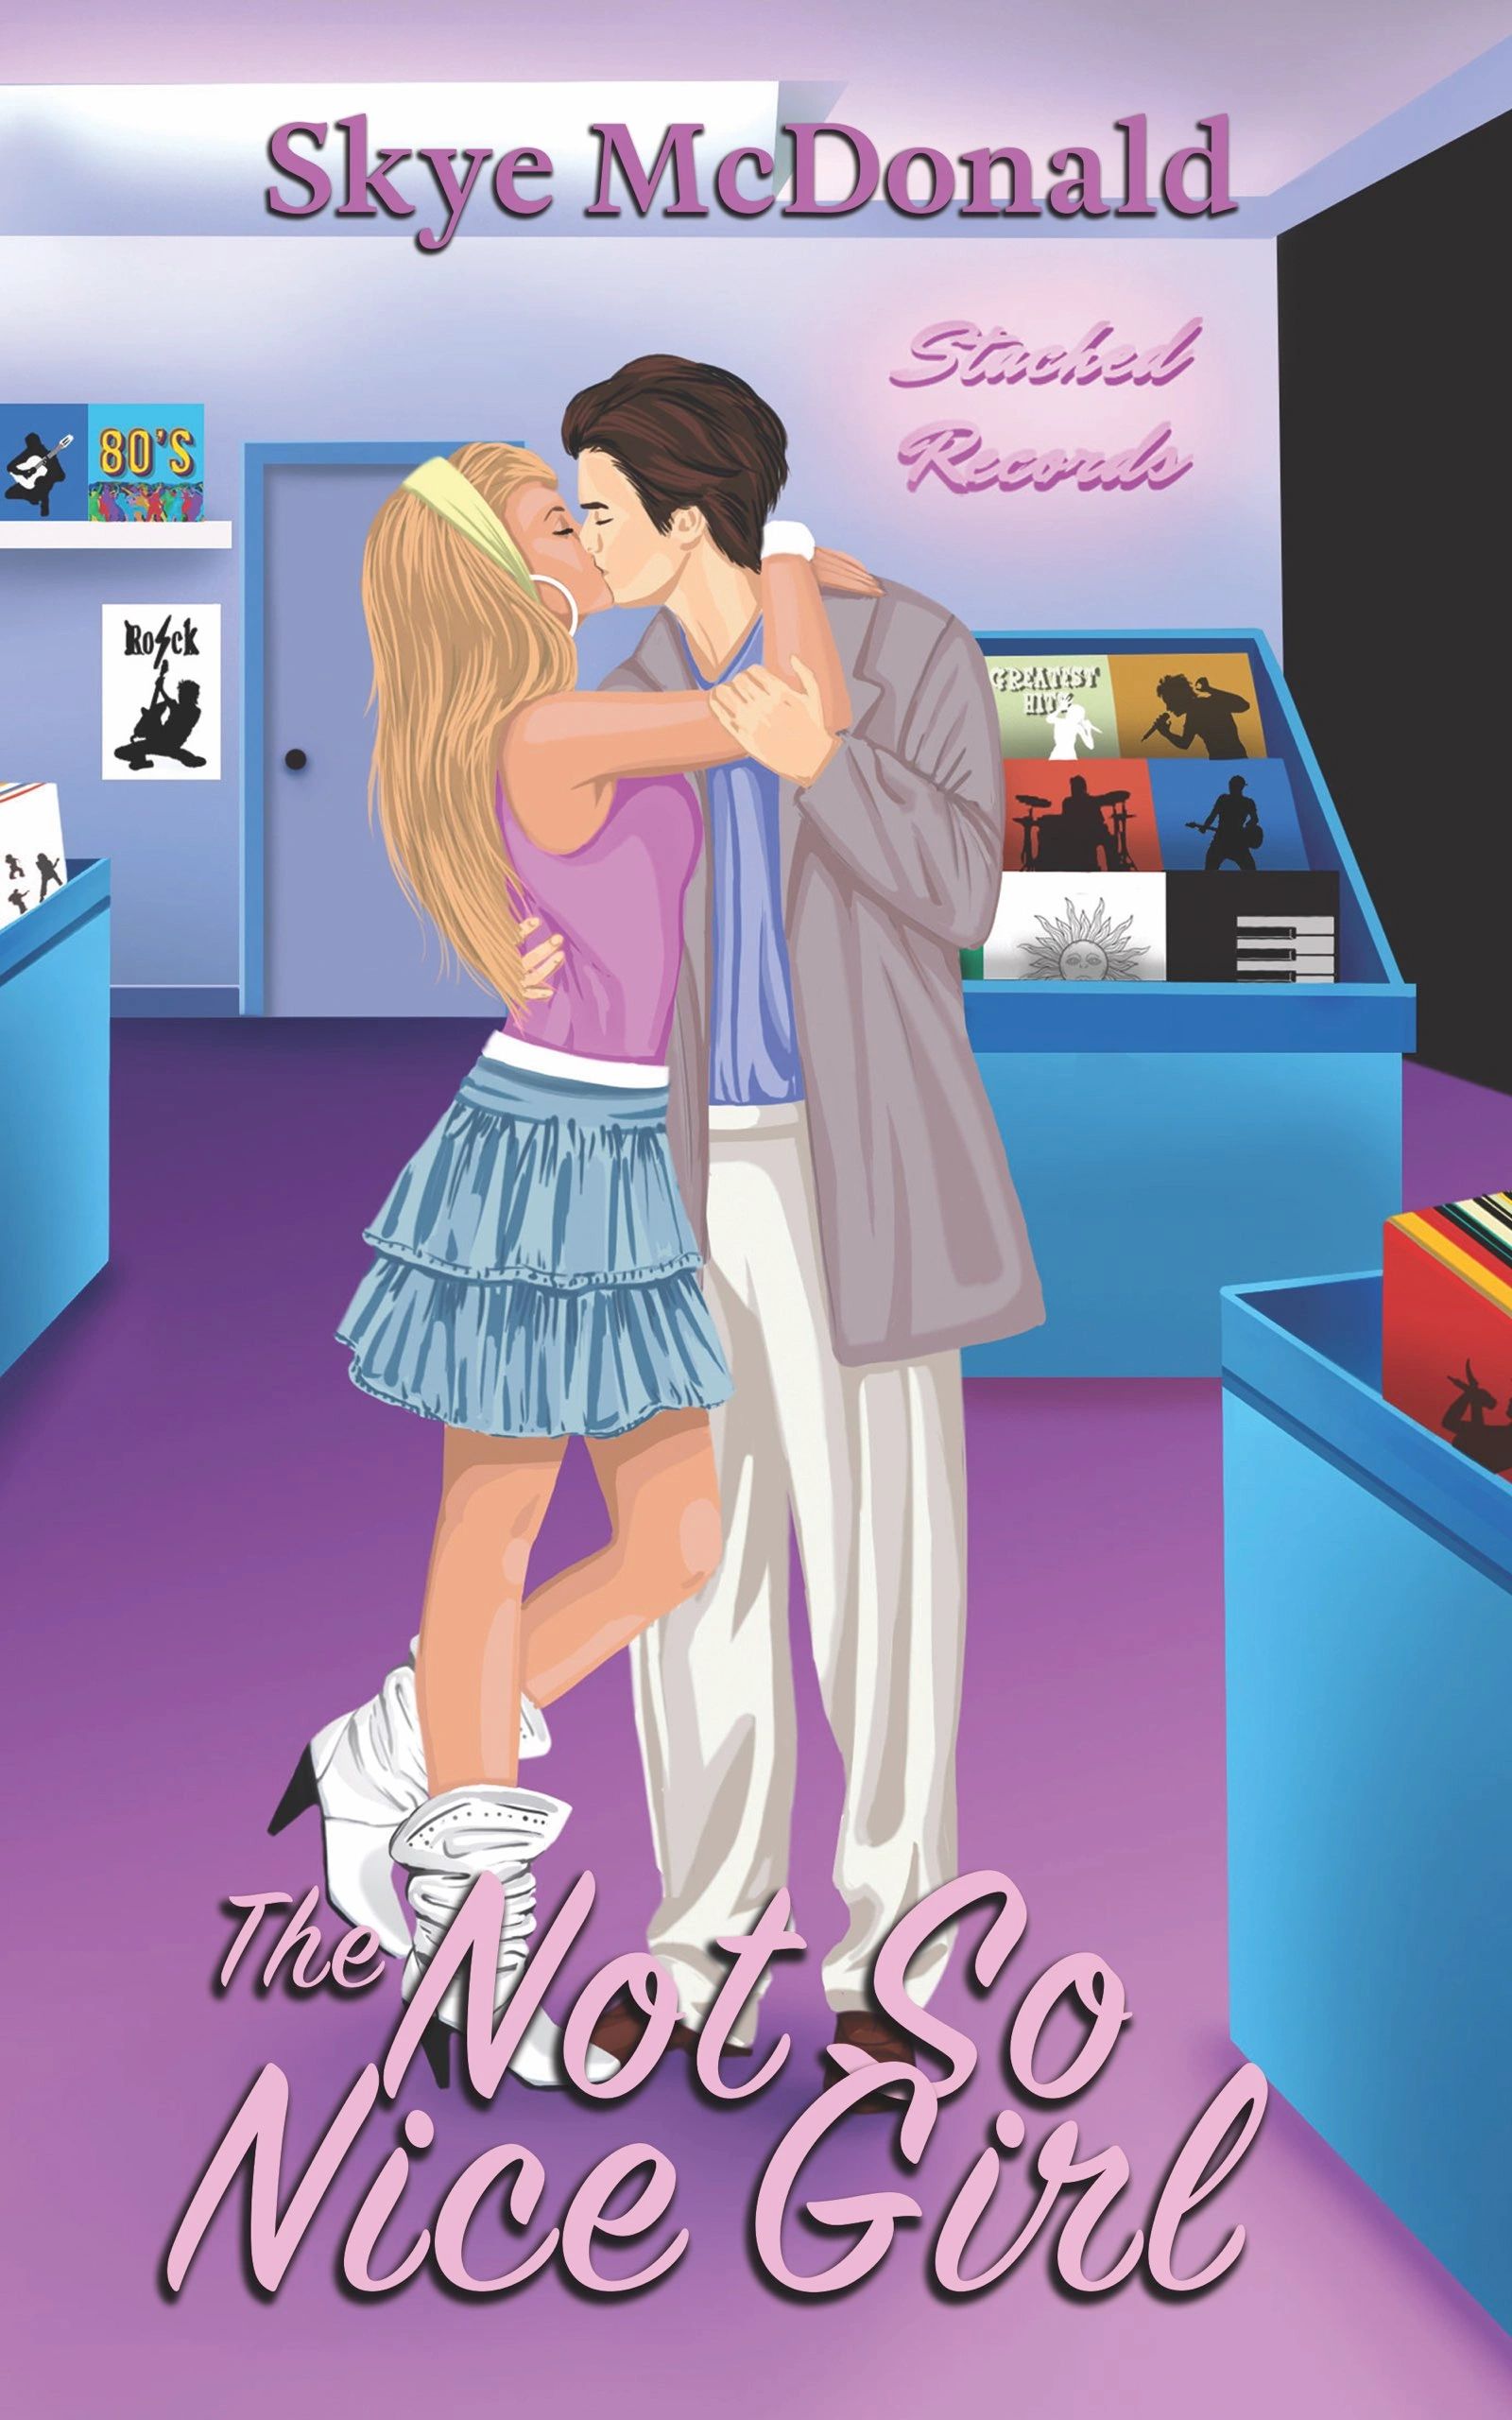 A book cover. A man and woman kiss in a record store